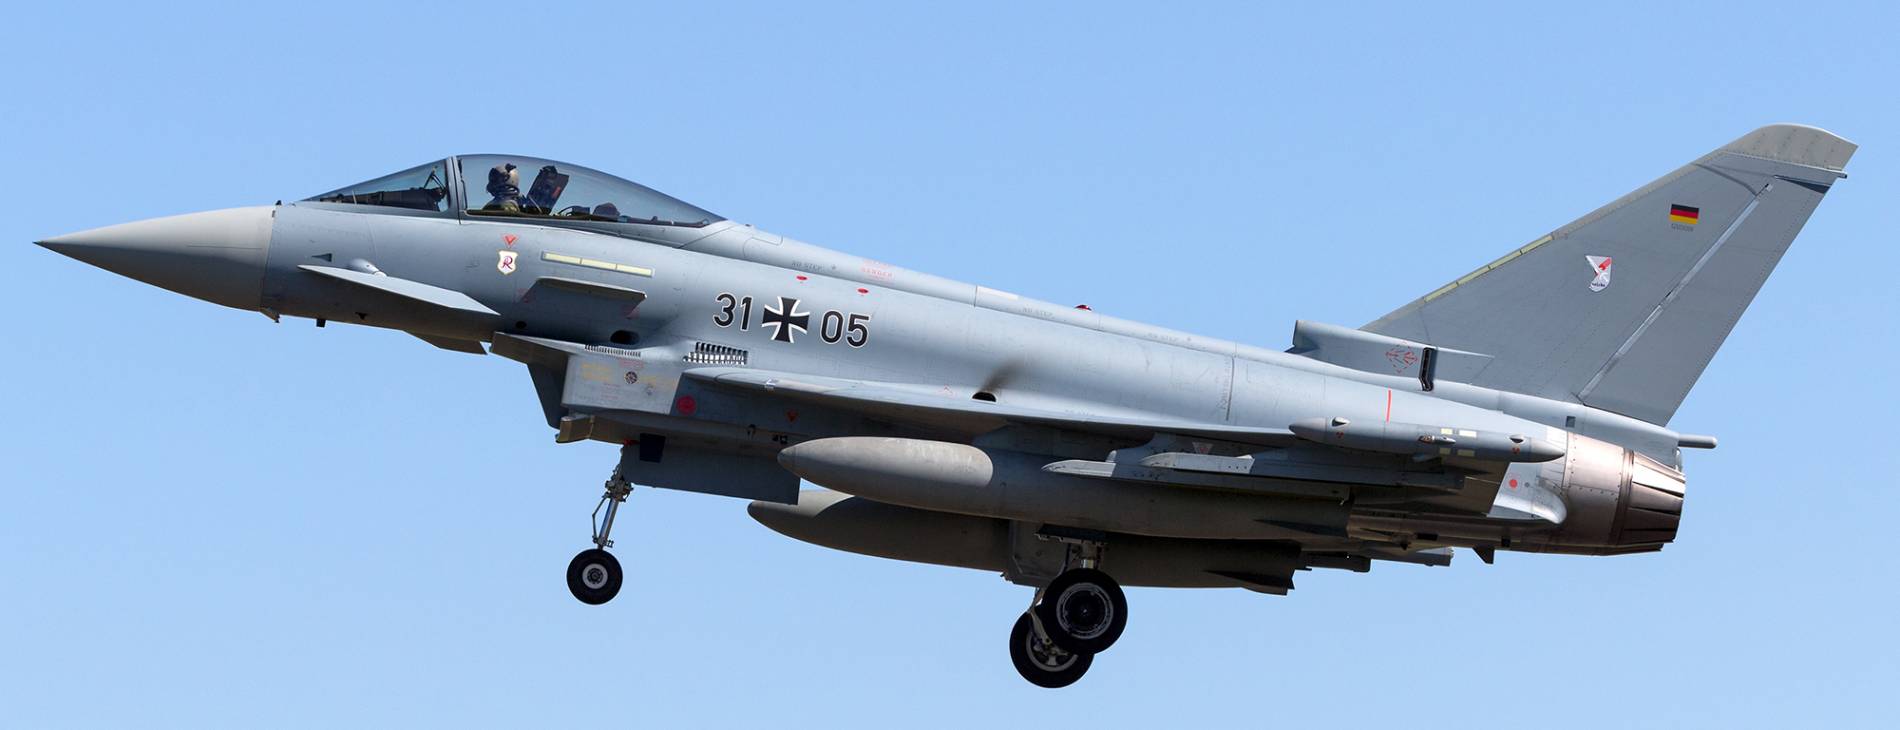 picture showing an n eurofighter plane